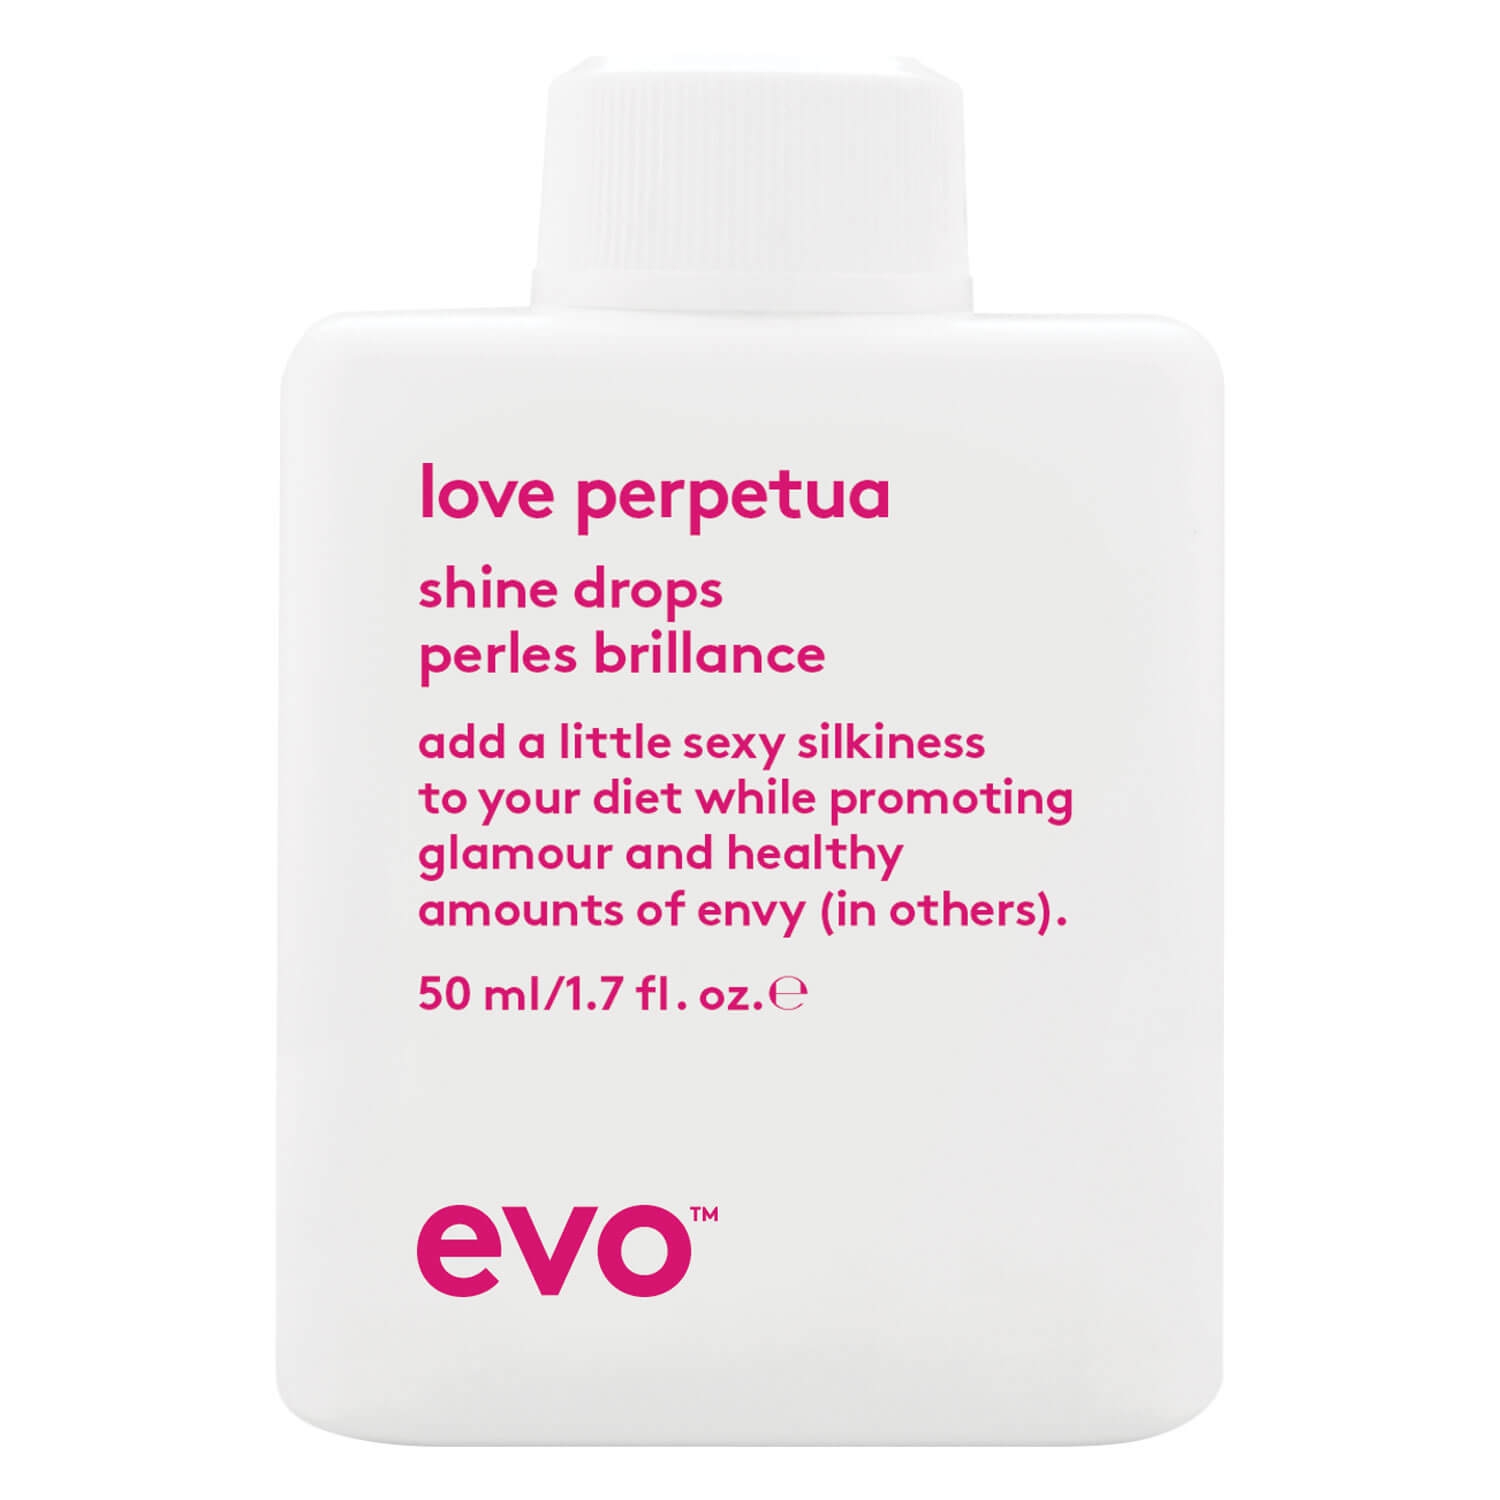 Product image from evo smooth - love perpetua shine drops